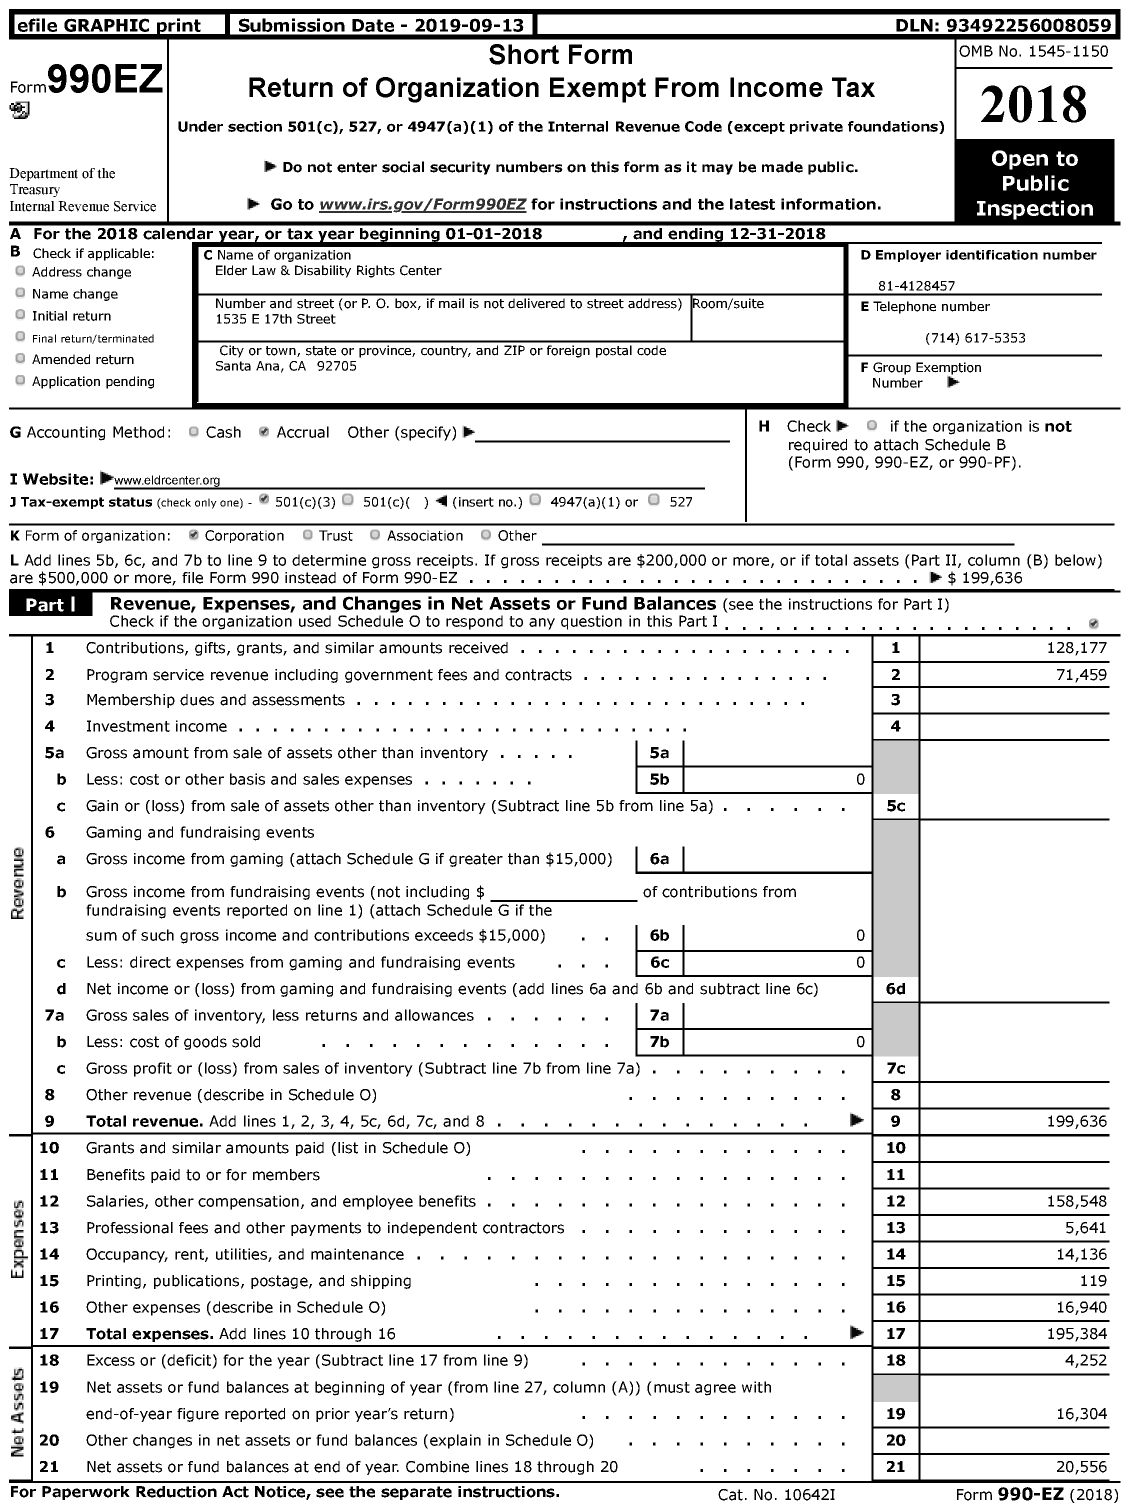 Image of first page of 2018 Form 990EZ for Elder Law and Disability Rights Center